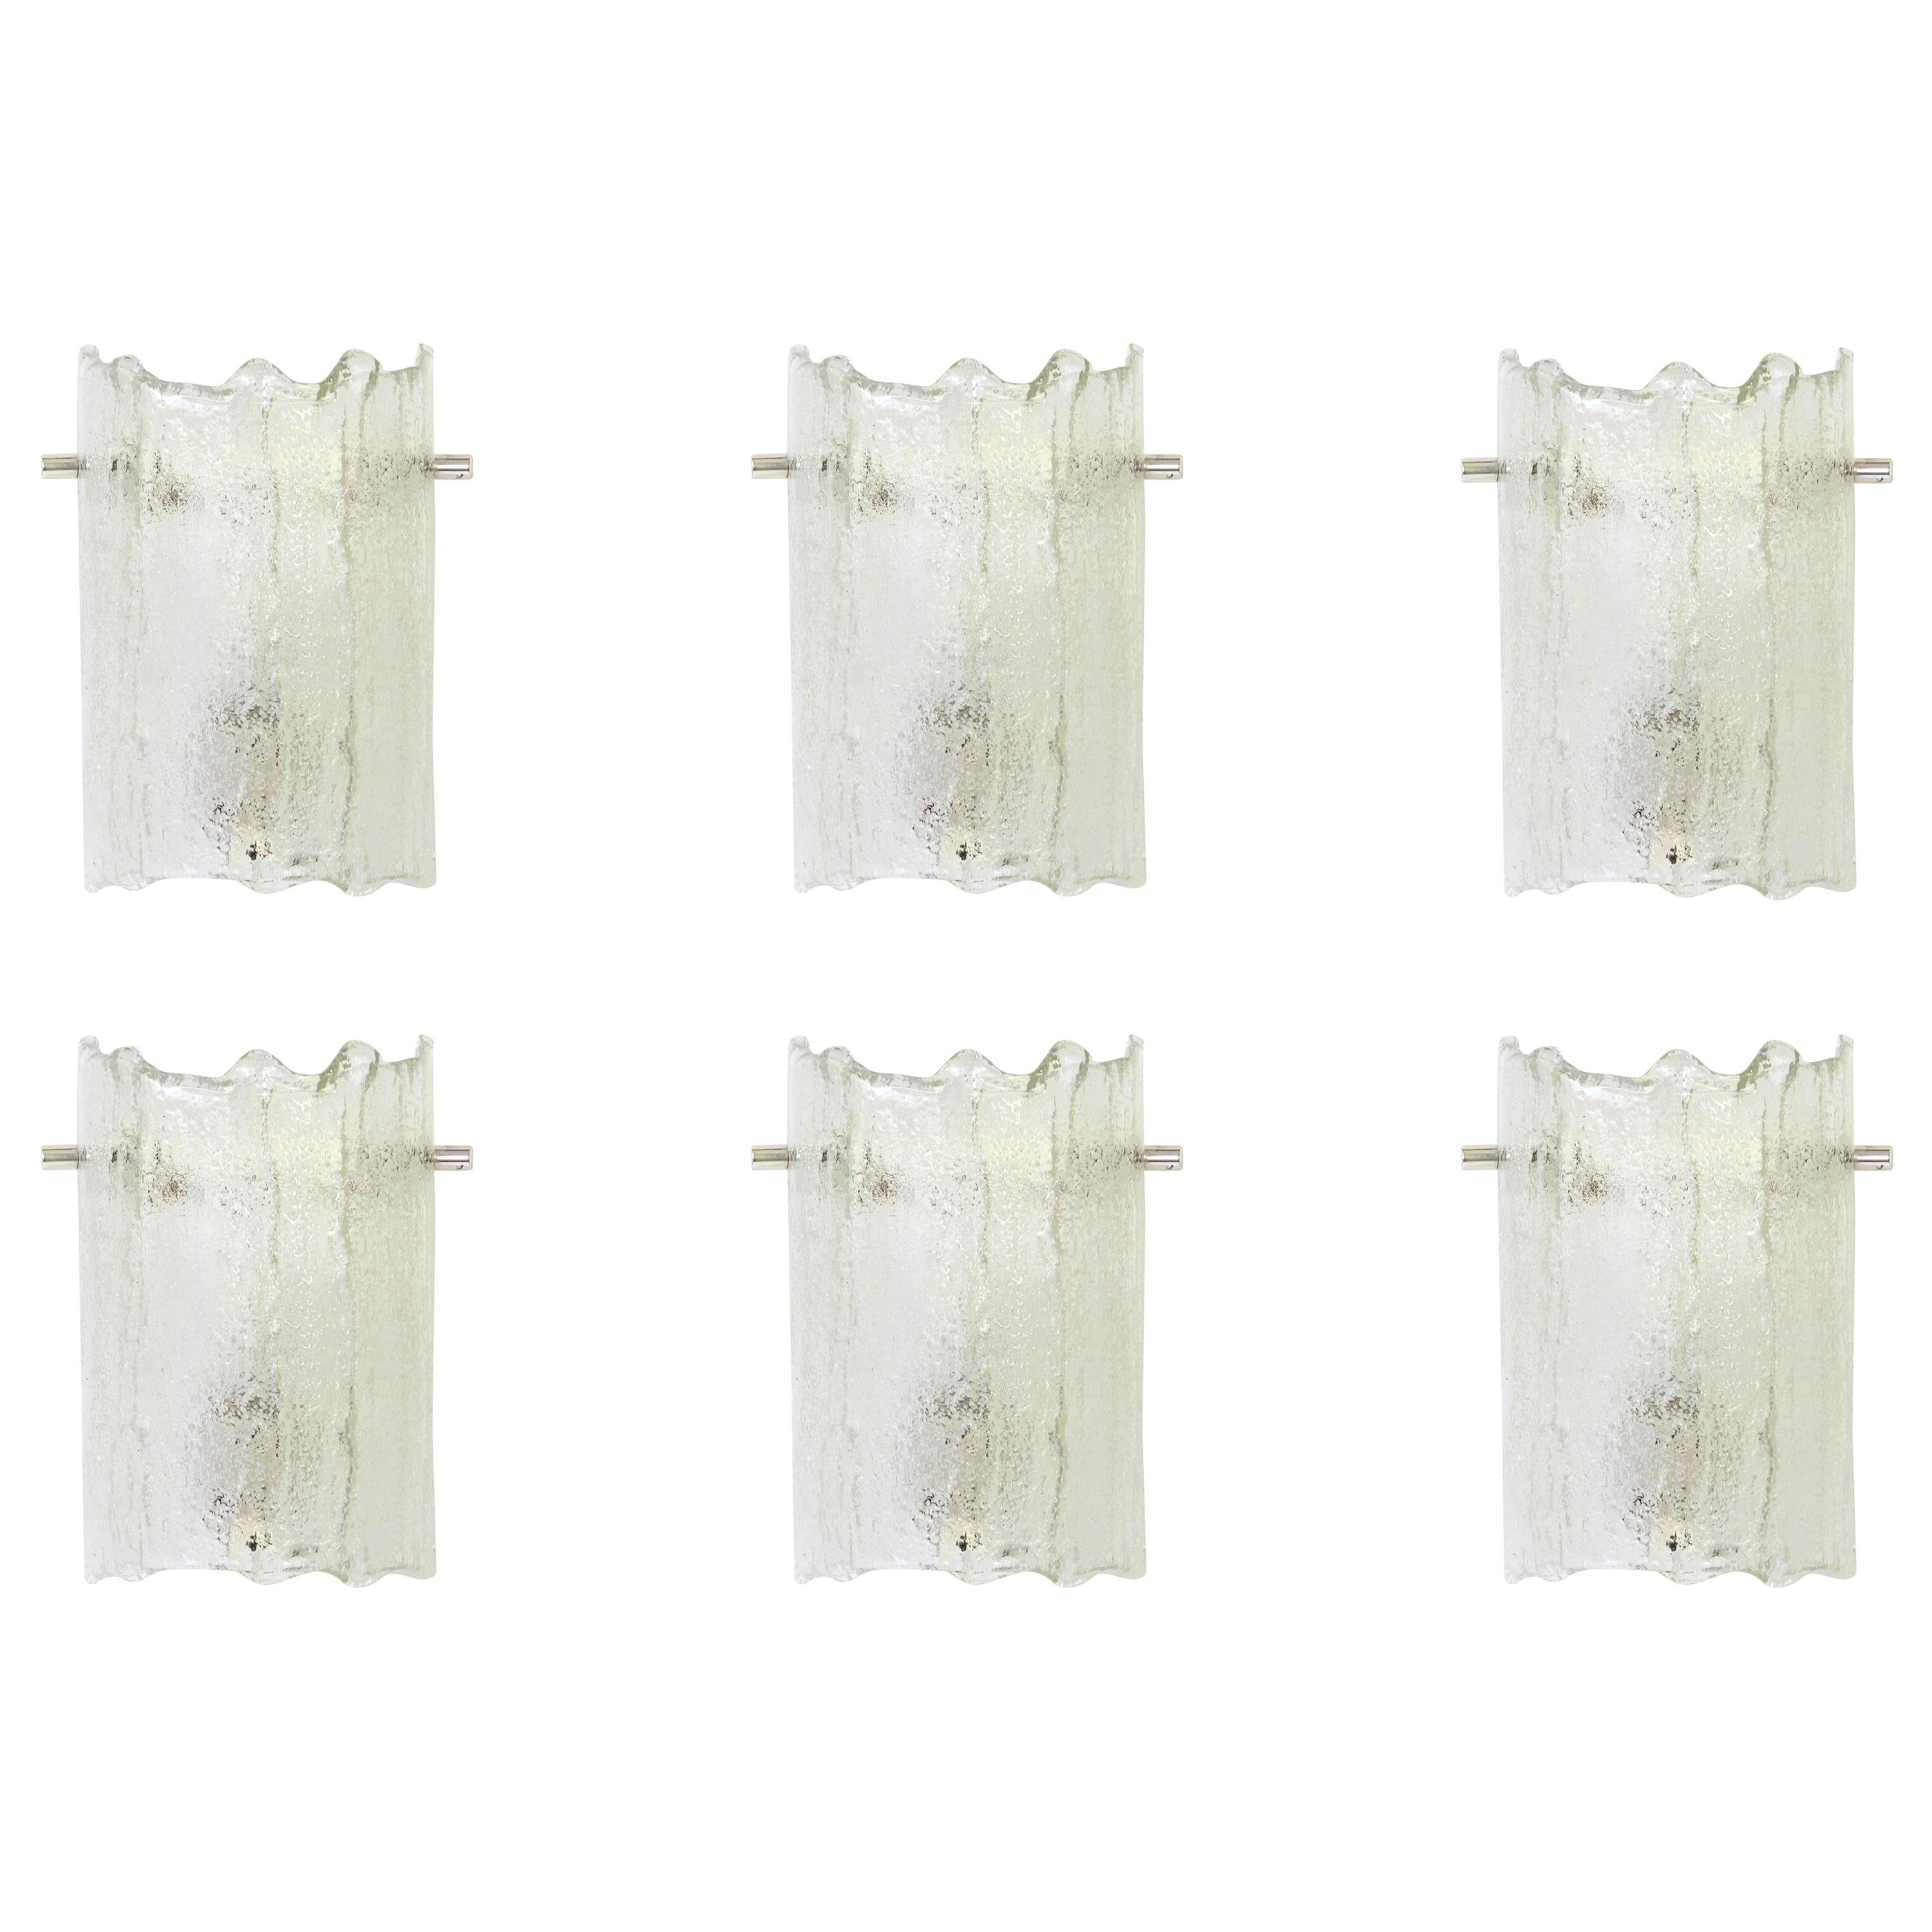 1 of 4 Pairs of Murano Ice Glass Vanity Sconces by Kaiser, Germany, 1970s For Sale